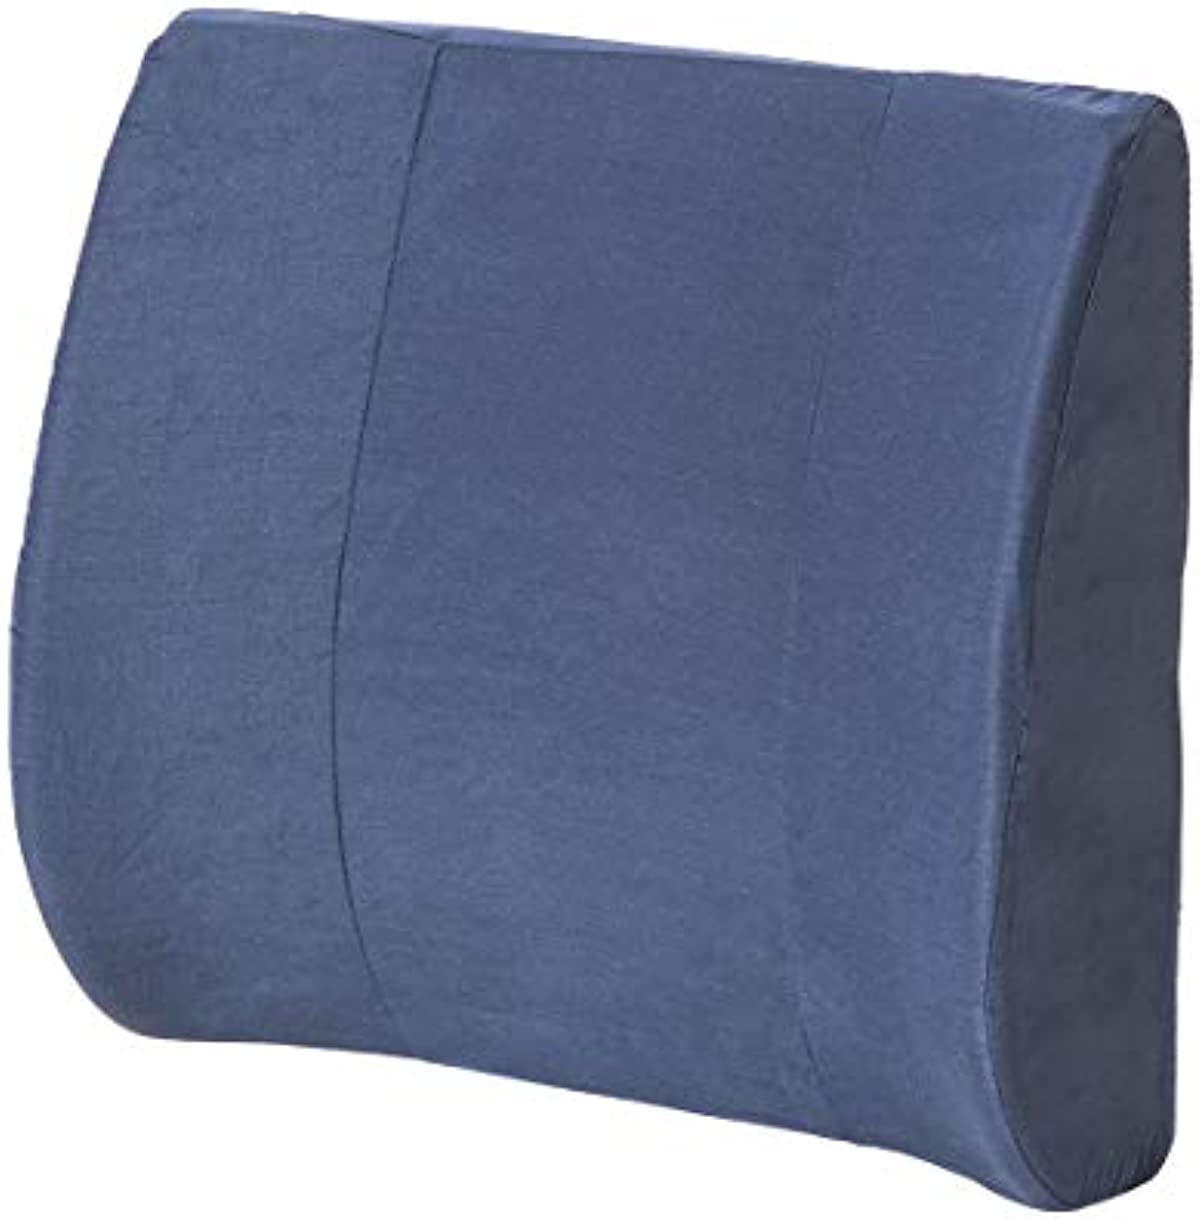 Essential Medical Supply Molded Lumbar Cushion with Elastic Positioning Strap in Navy, 1 Count (Pack of 1)